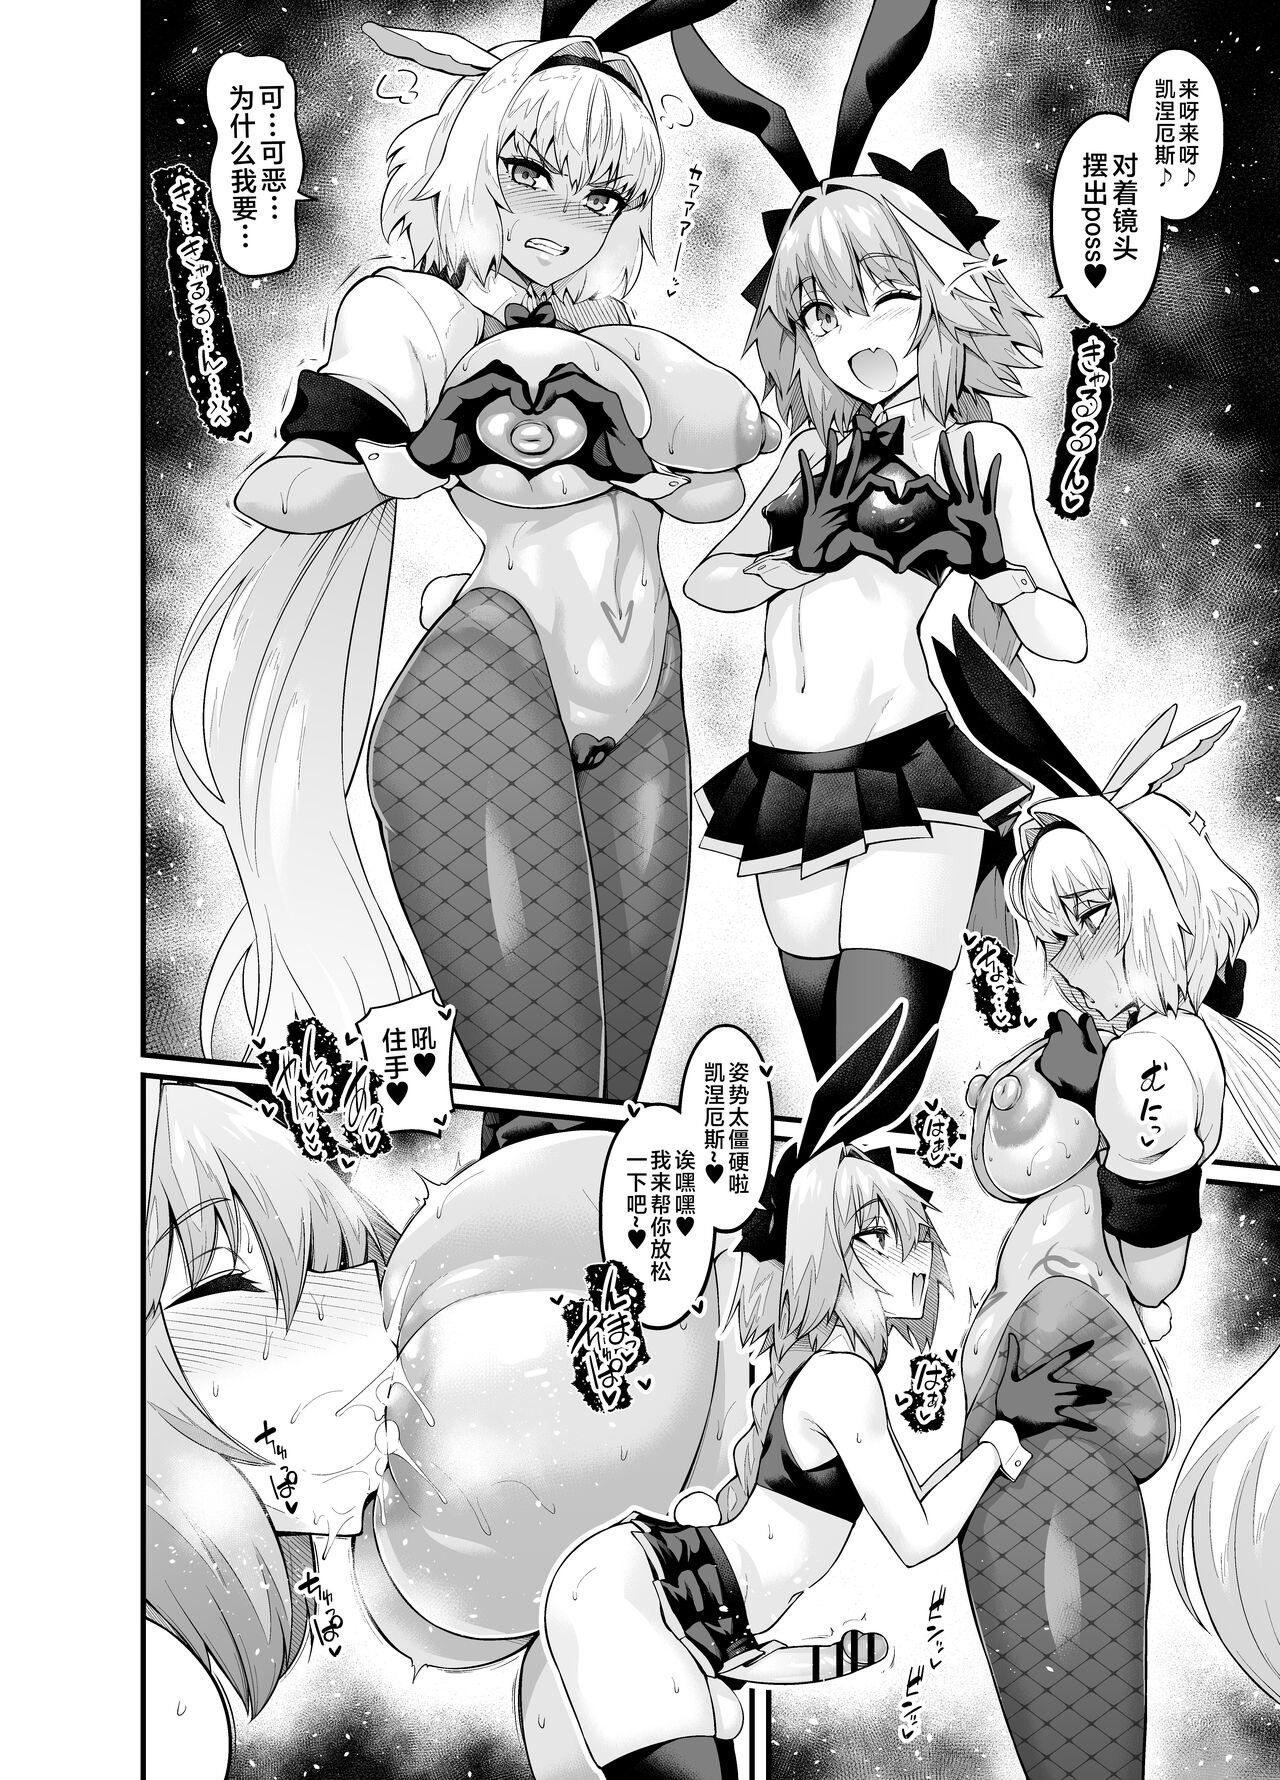 Butts Caenis, Astolfo to Pyon-Pyon Suru - Fate grand order Spread - Page 2